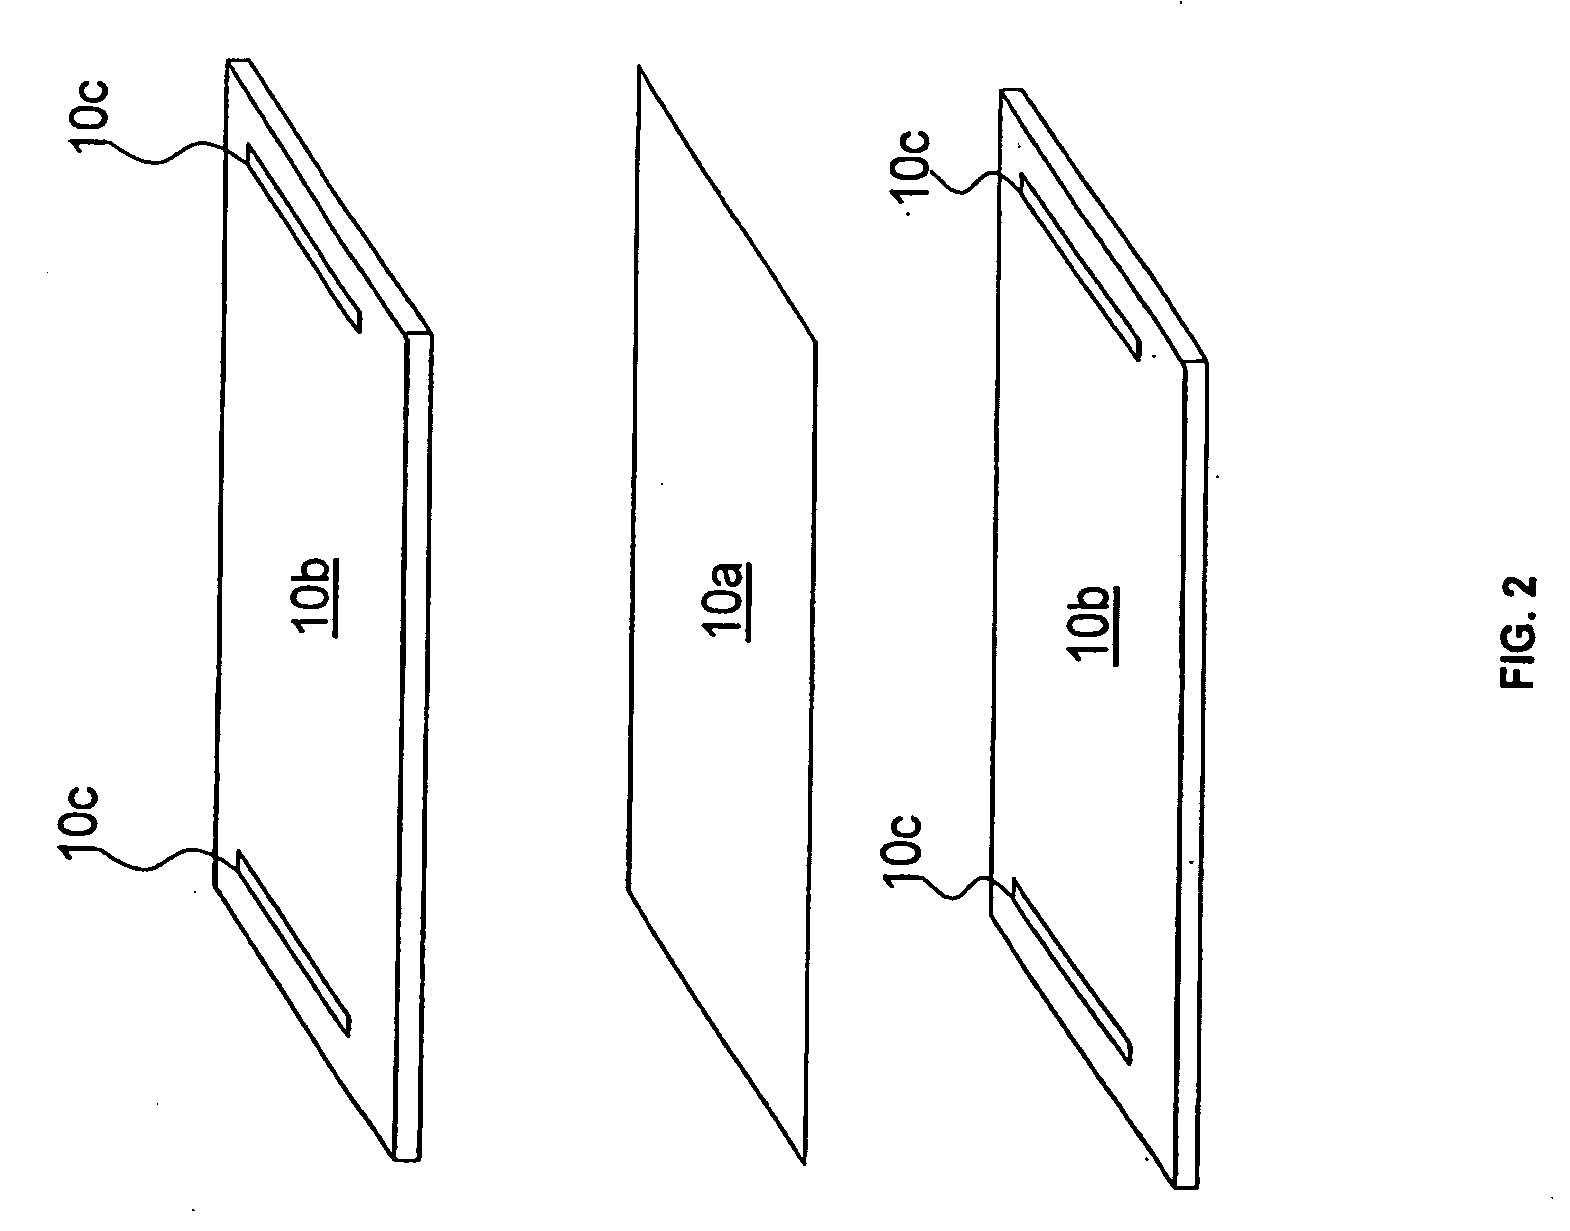 Fuel processor for fuel cell systems